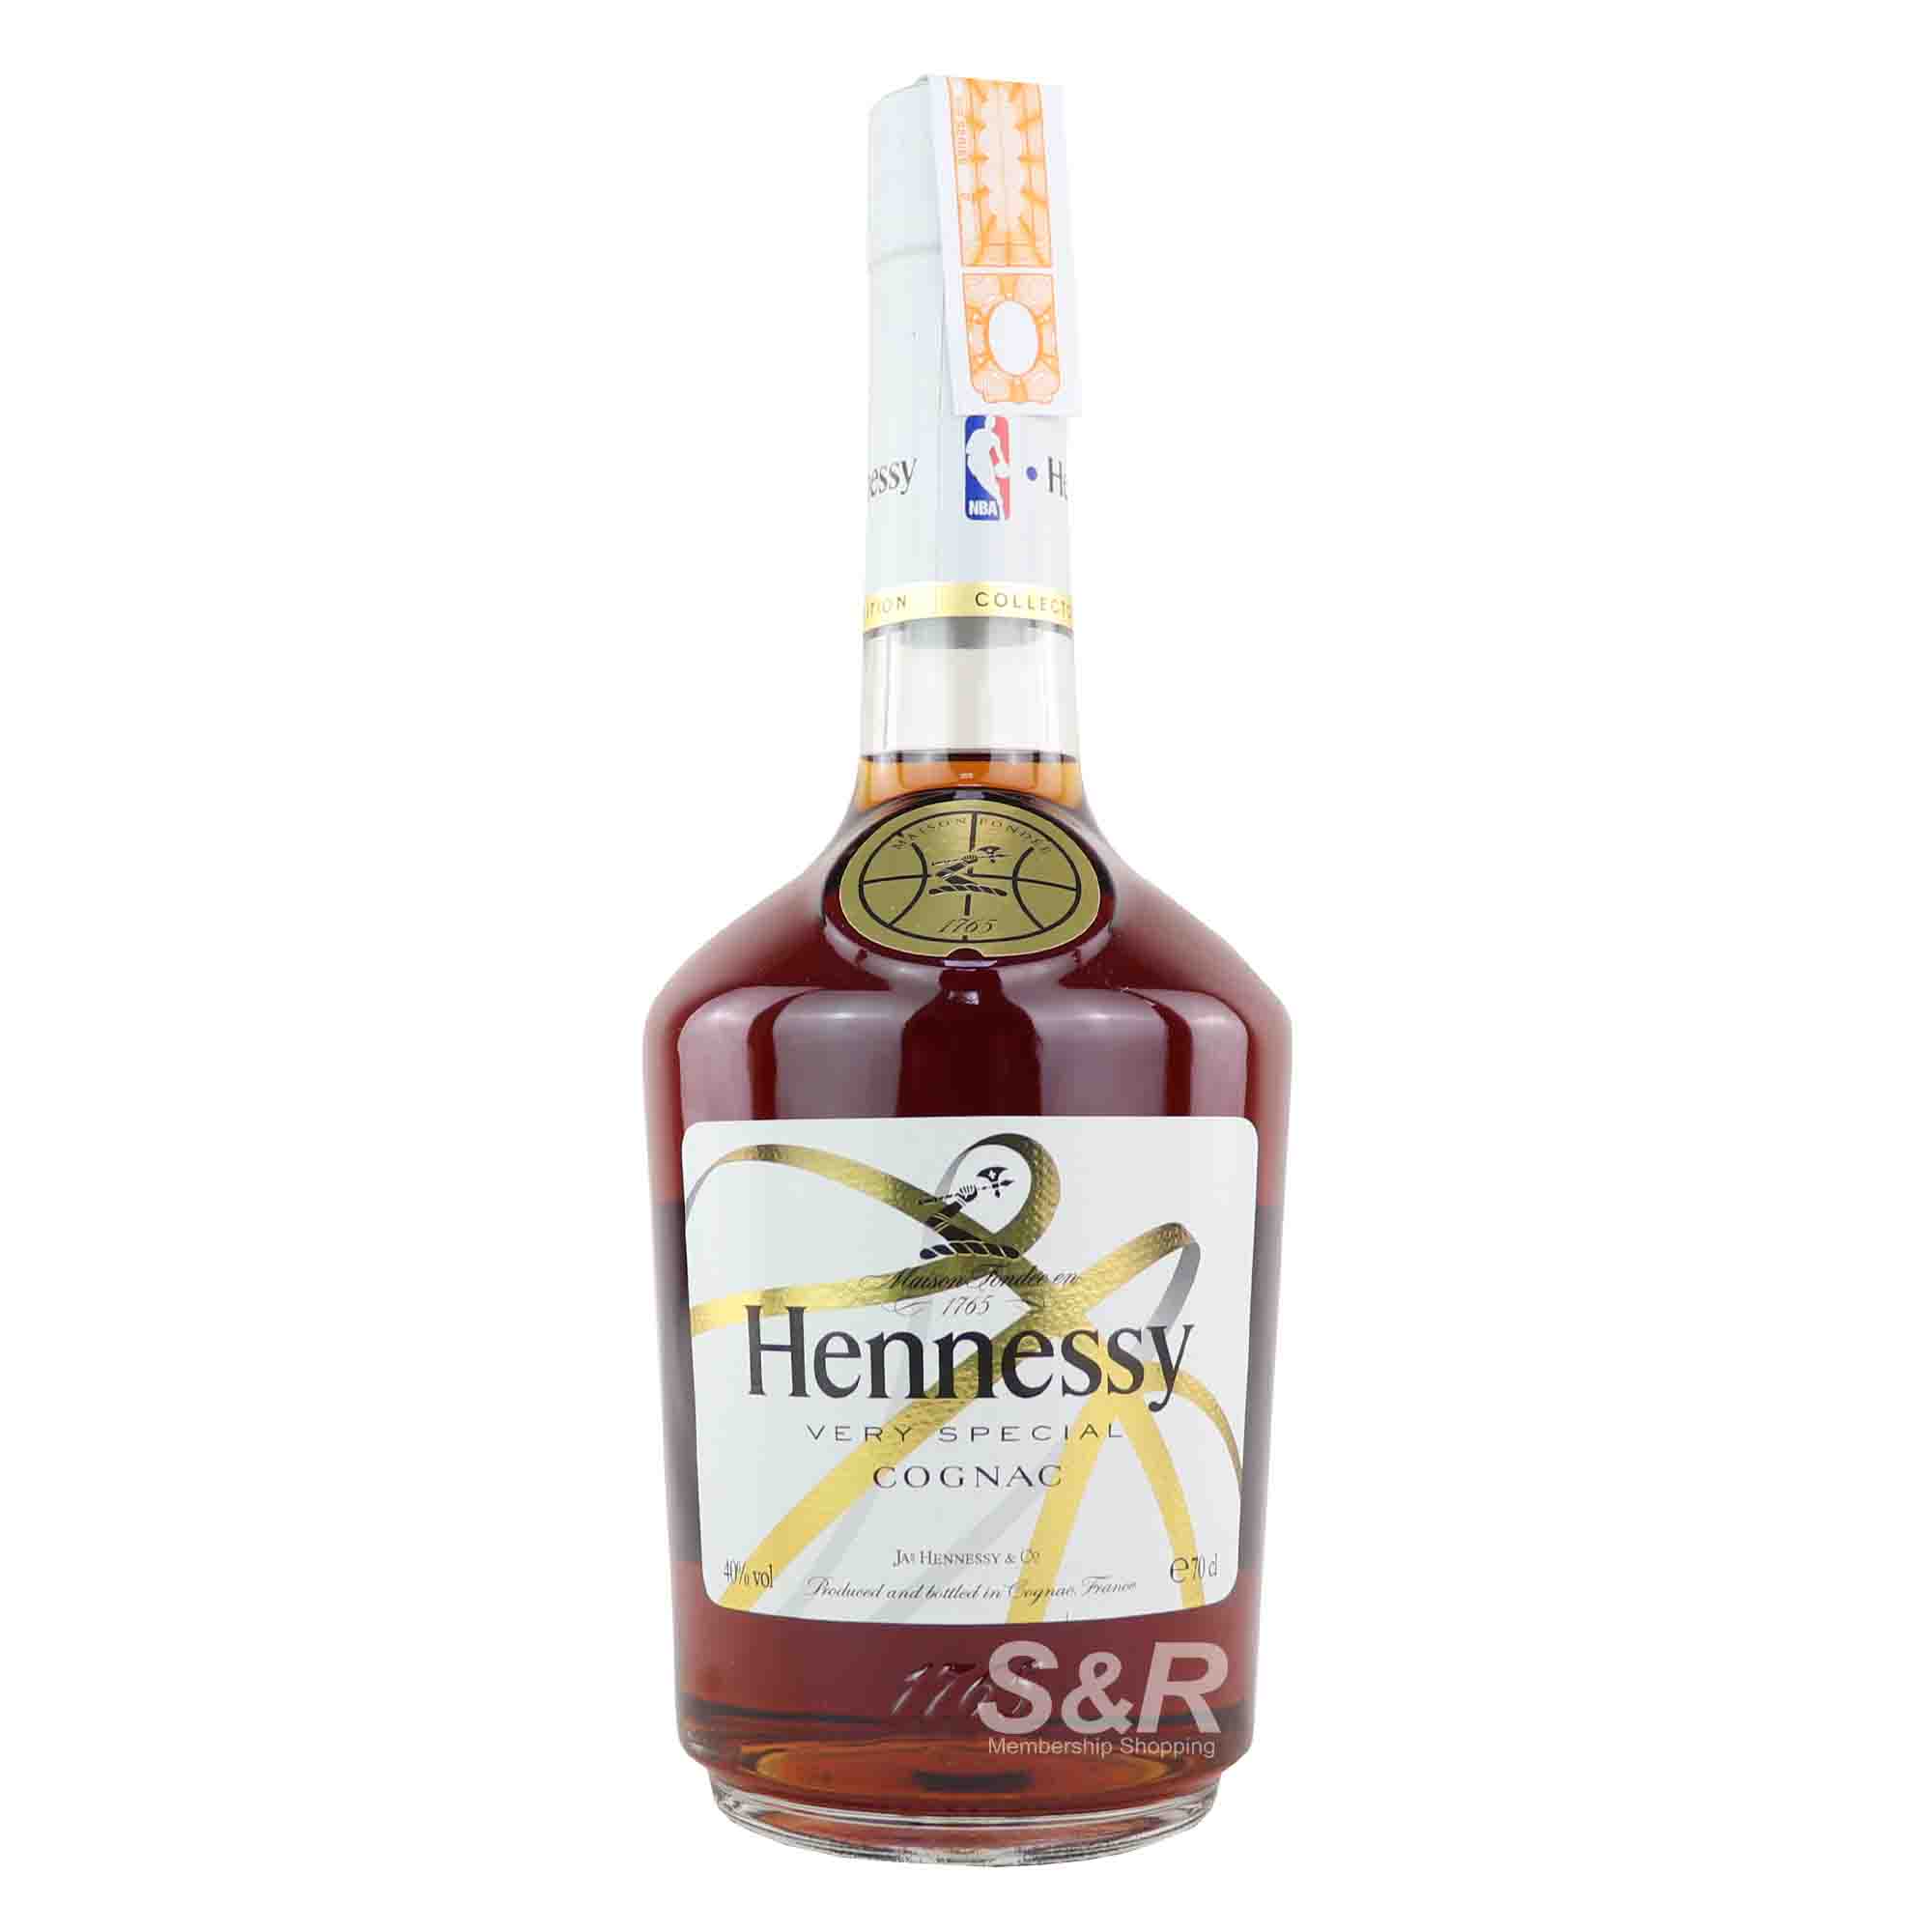 Hennessy Very Special Cognac 700mL